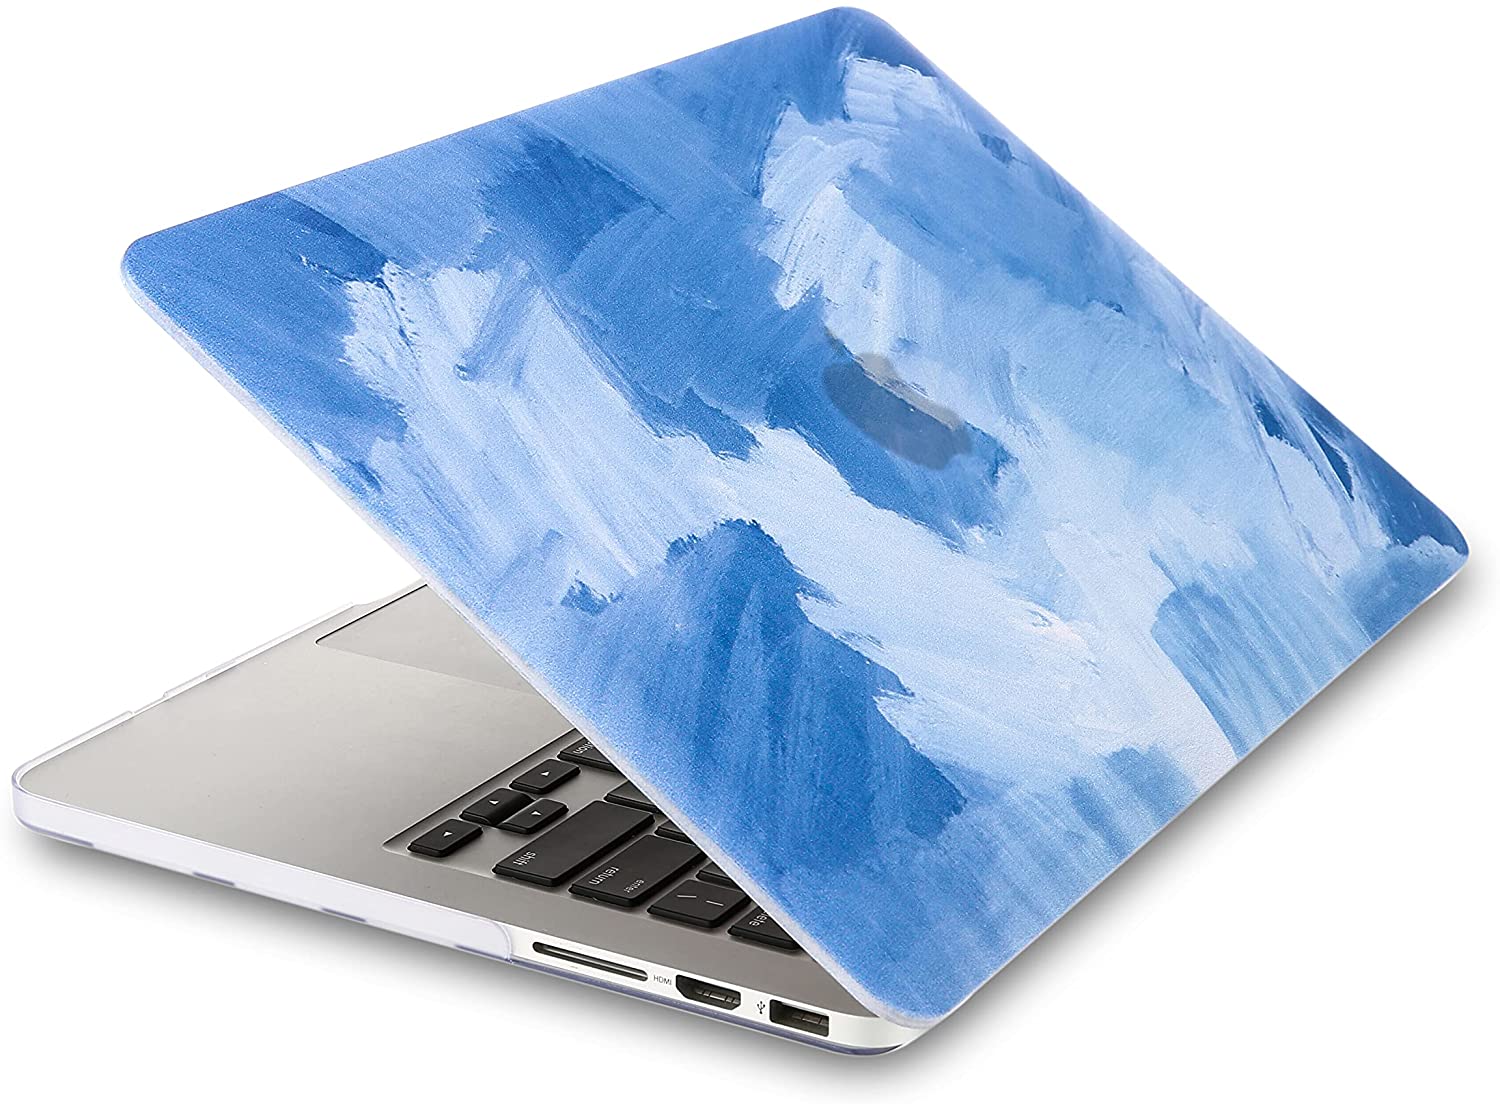 Creative Printed Hard Painting Case Cover for Macbook Air 11 12"Pro 13"15"Retina 